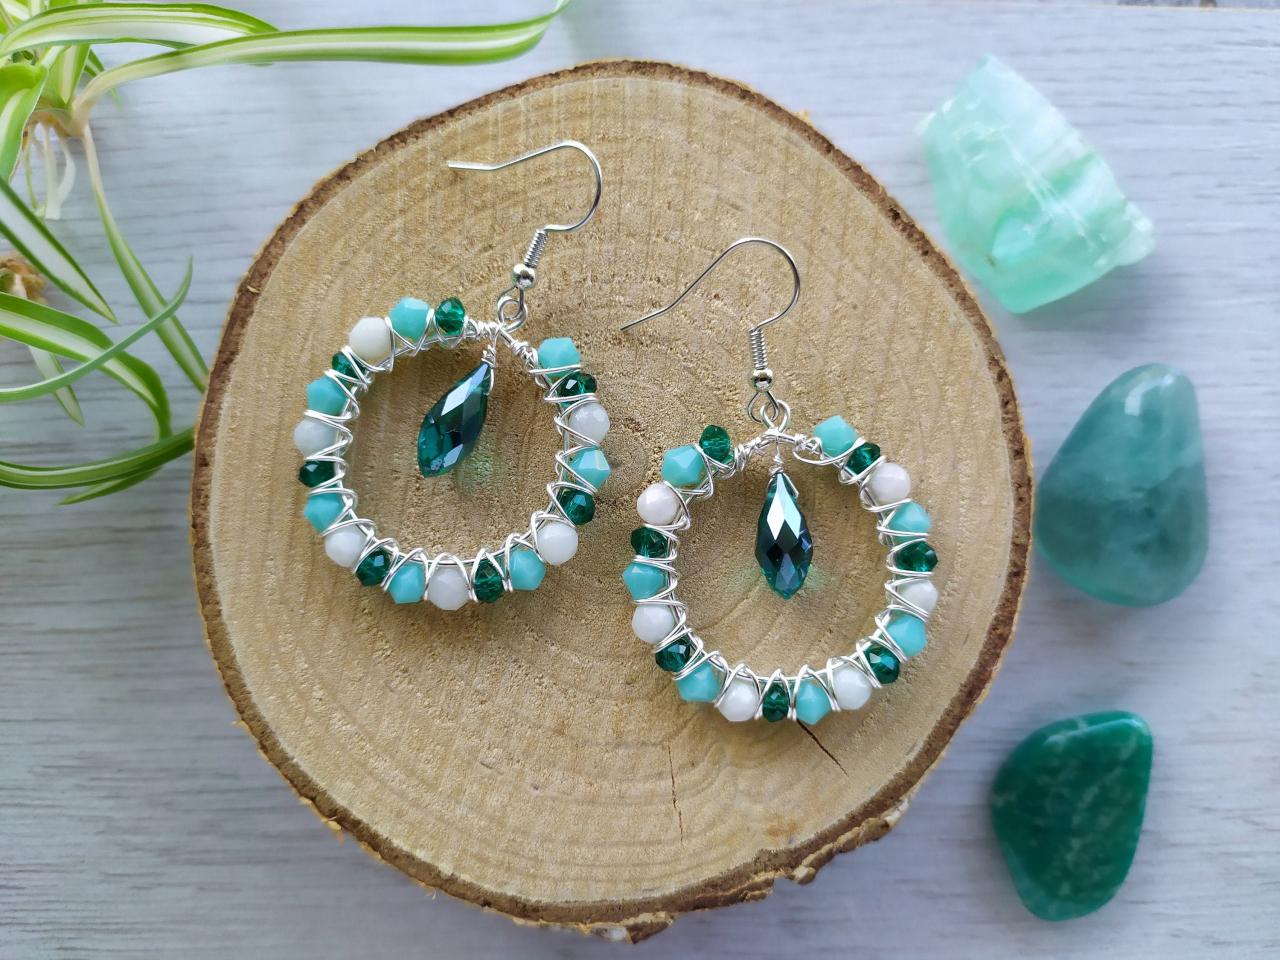 Emerald Green Hoop Earrings, Small Hoops With Amazonite And Glass Beads, Green Boho Beaded Earrings, Wire Wrapped Hoops With Dangle